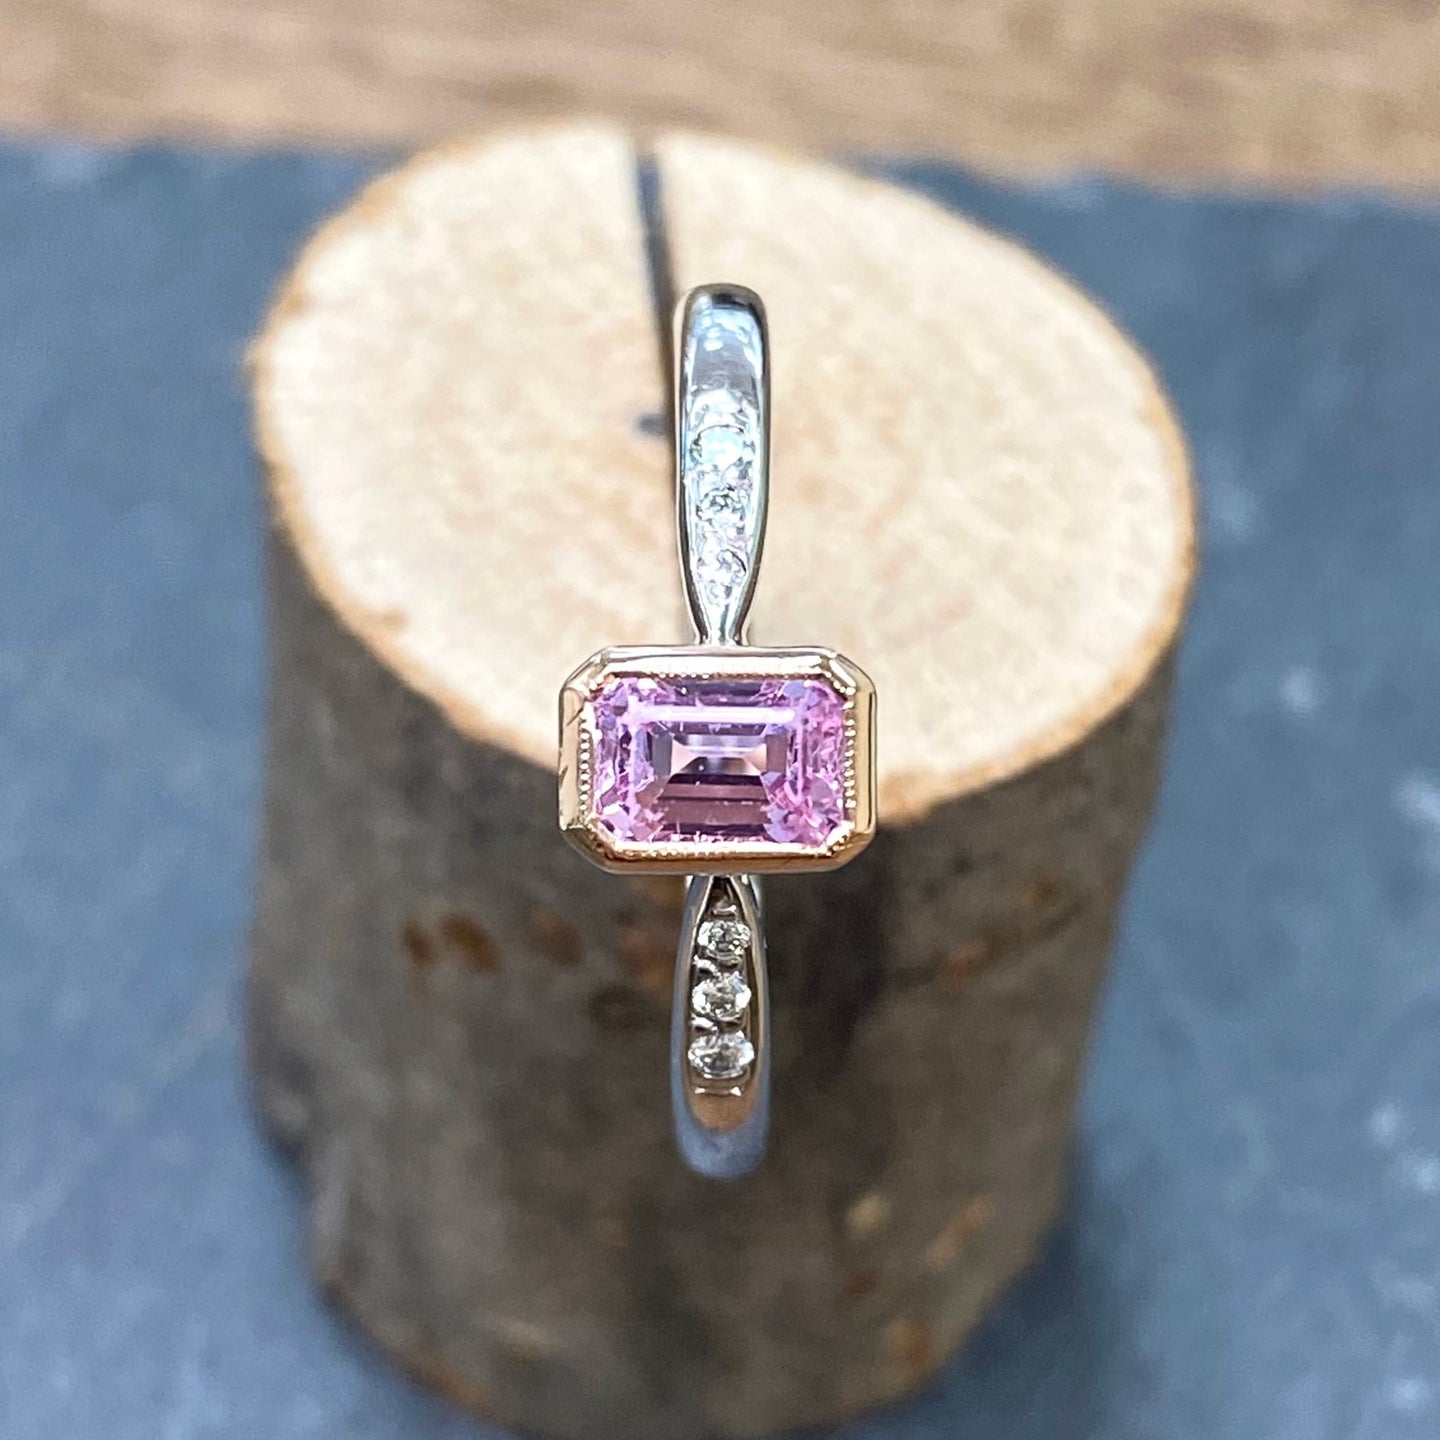 Pre-Loved 18ct White Gold Ring with a Pink Ceylon Sapphire and Diamonds